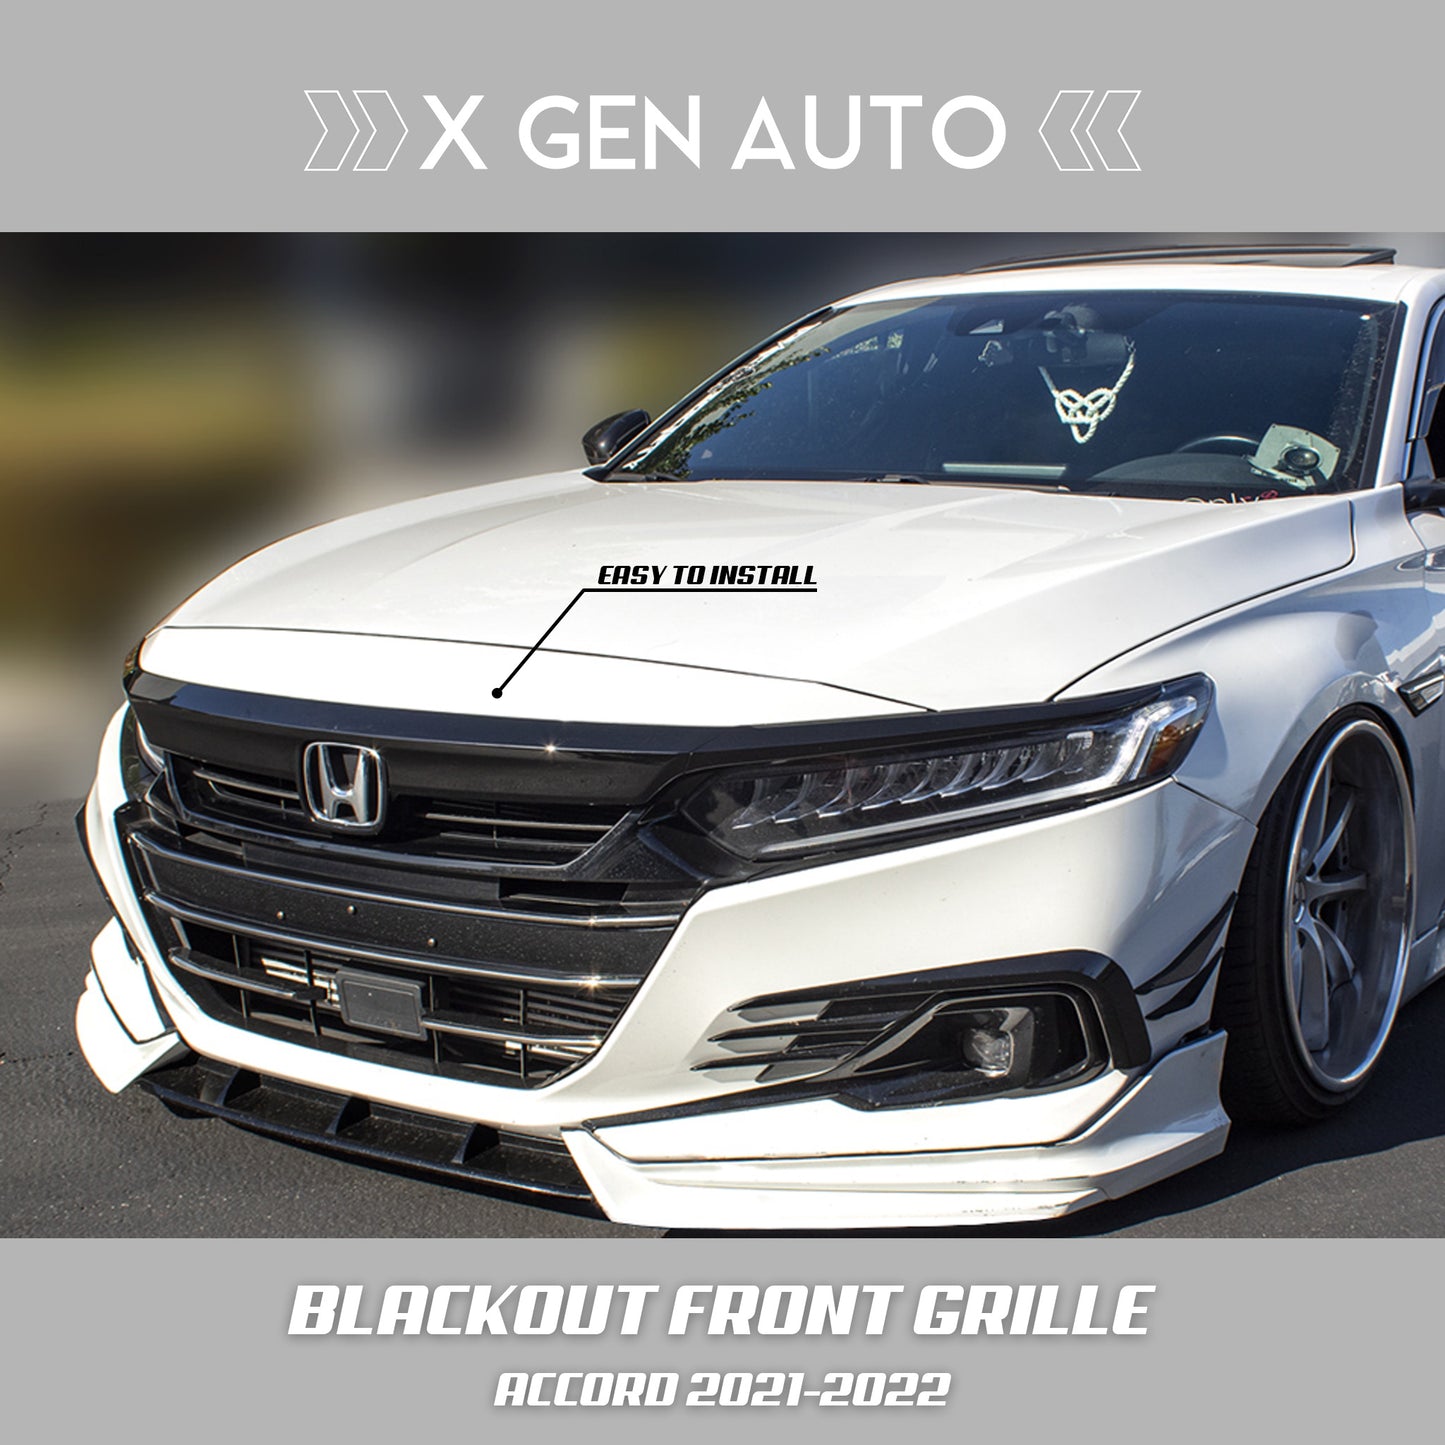 [ACCORD 2021-2022] BLACKOUT FRONT GRILLE KIT